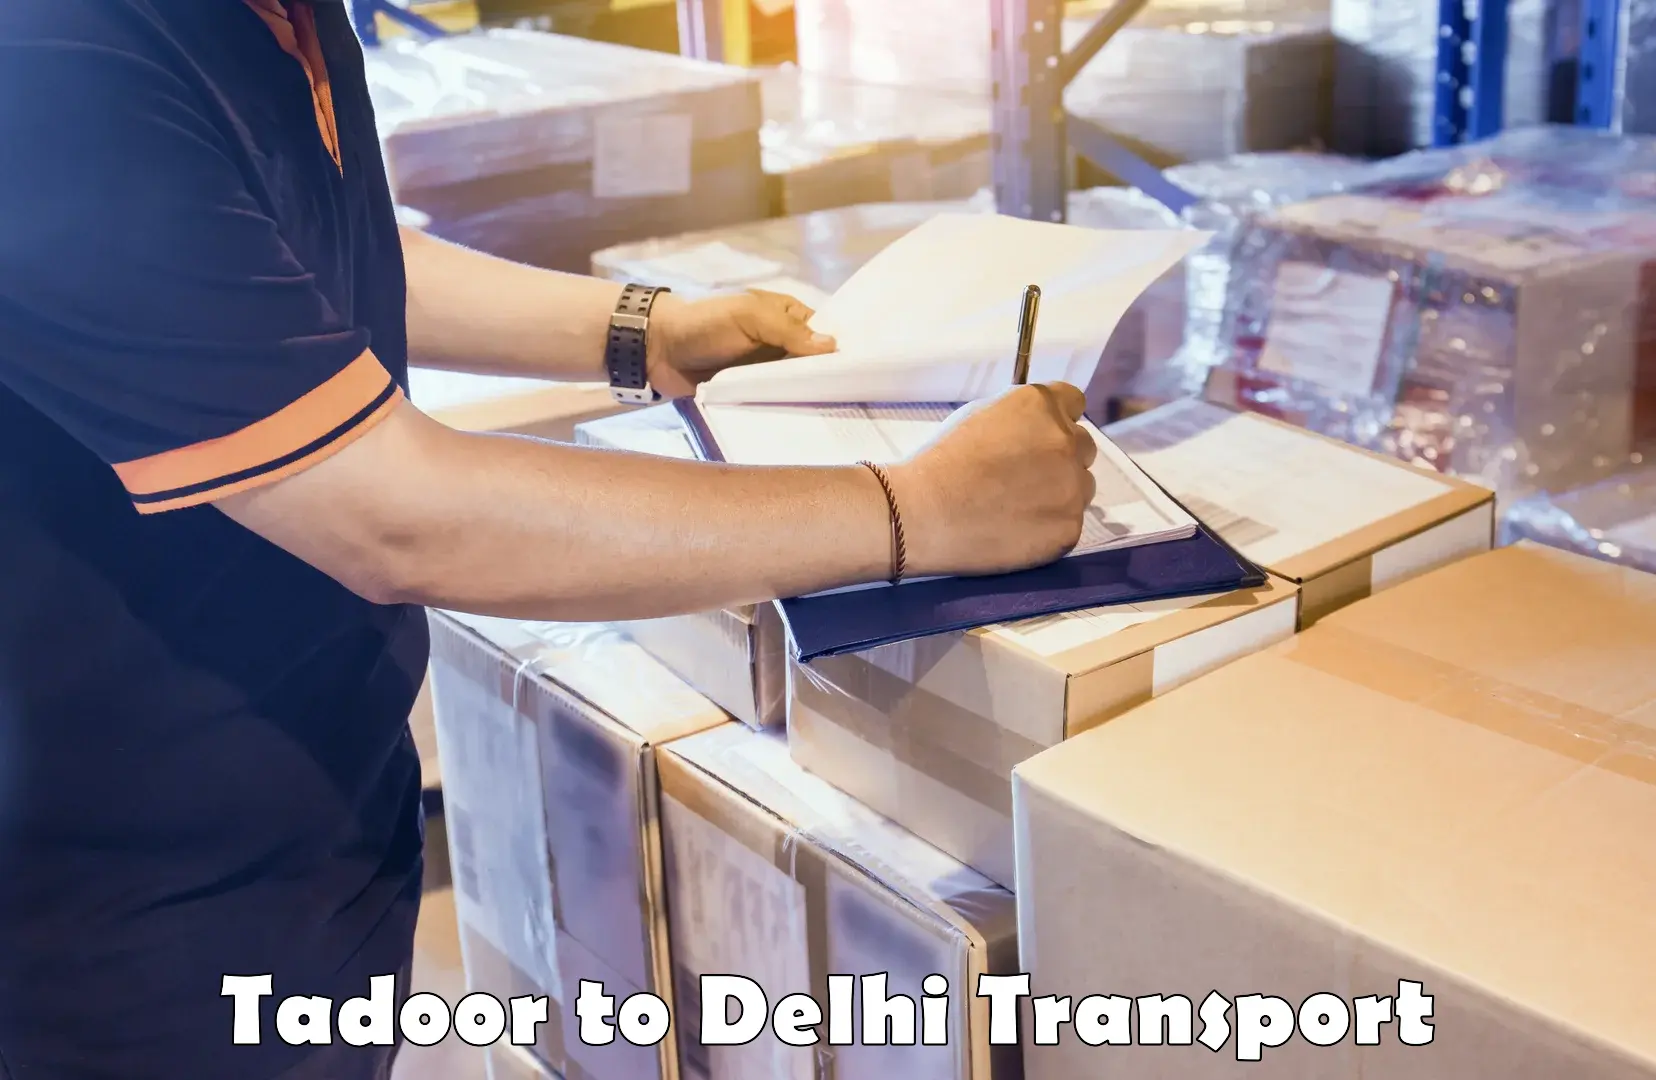 Daily parcel service transport Tadoor to NCR